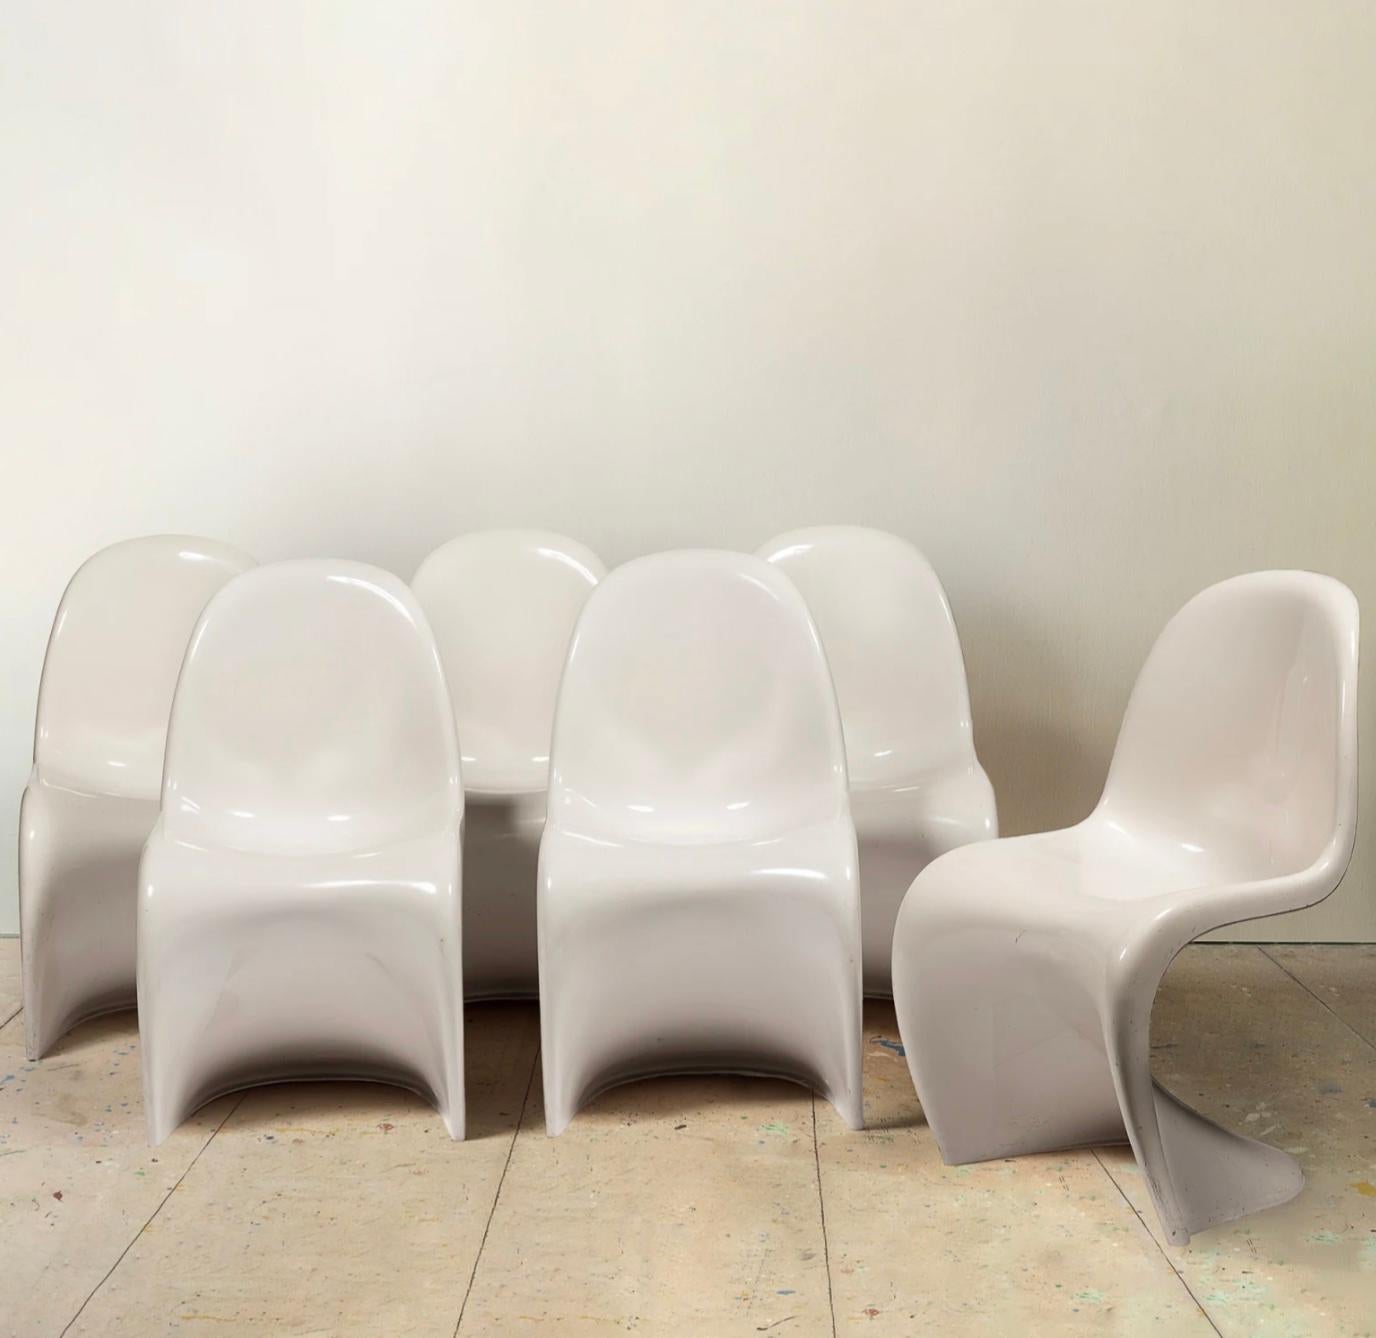 Set of 6 Verner Panton chairs in white lacquered molded ABS. Publisher's imprint under the seat. 

Herman Miller edition for Fehlbaum 1971 (except one from 1973). Bibliography: Peter & Charlotte FIELL, 1000 chairs, Taschen, 1997.

A good early set